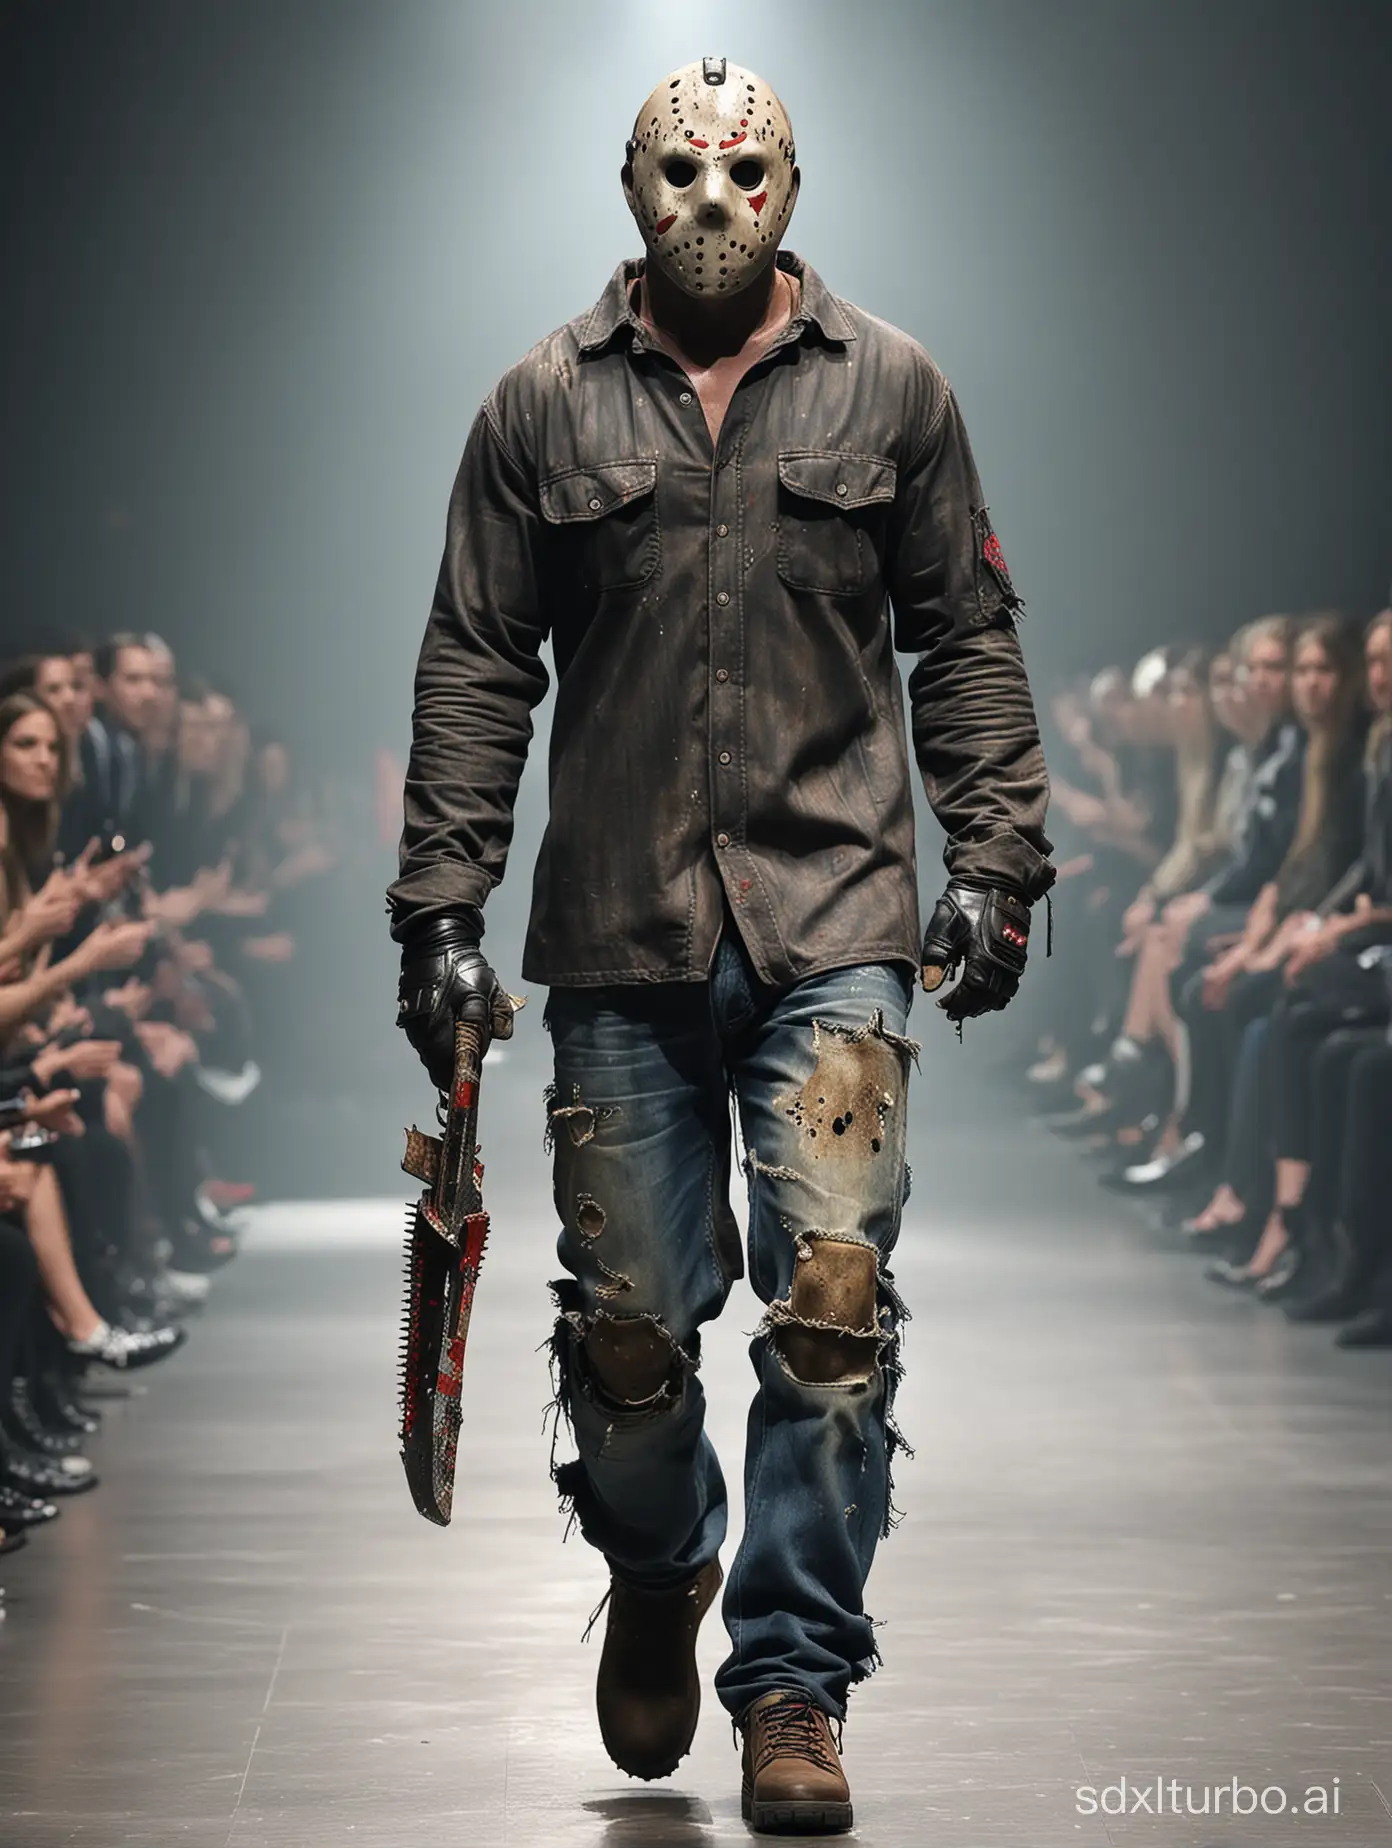 Jason Voorhees from Friday the 13th walks the runway, walks, real Jason, chainsaw, hockey mask, (full body image), (audience on both sides), Paris Fashion Week runway